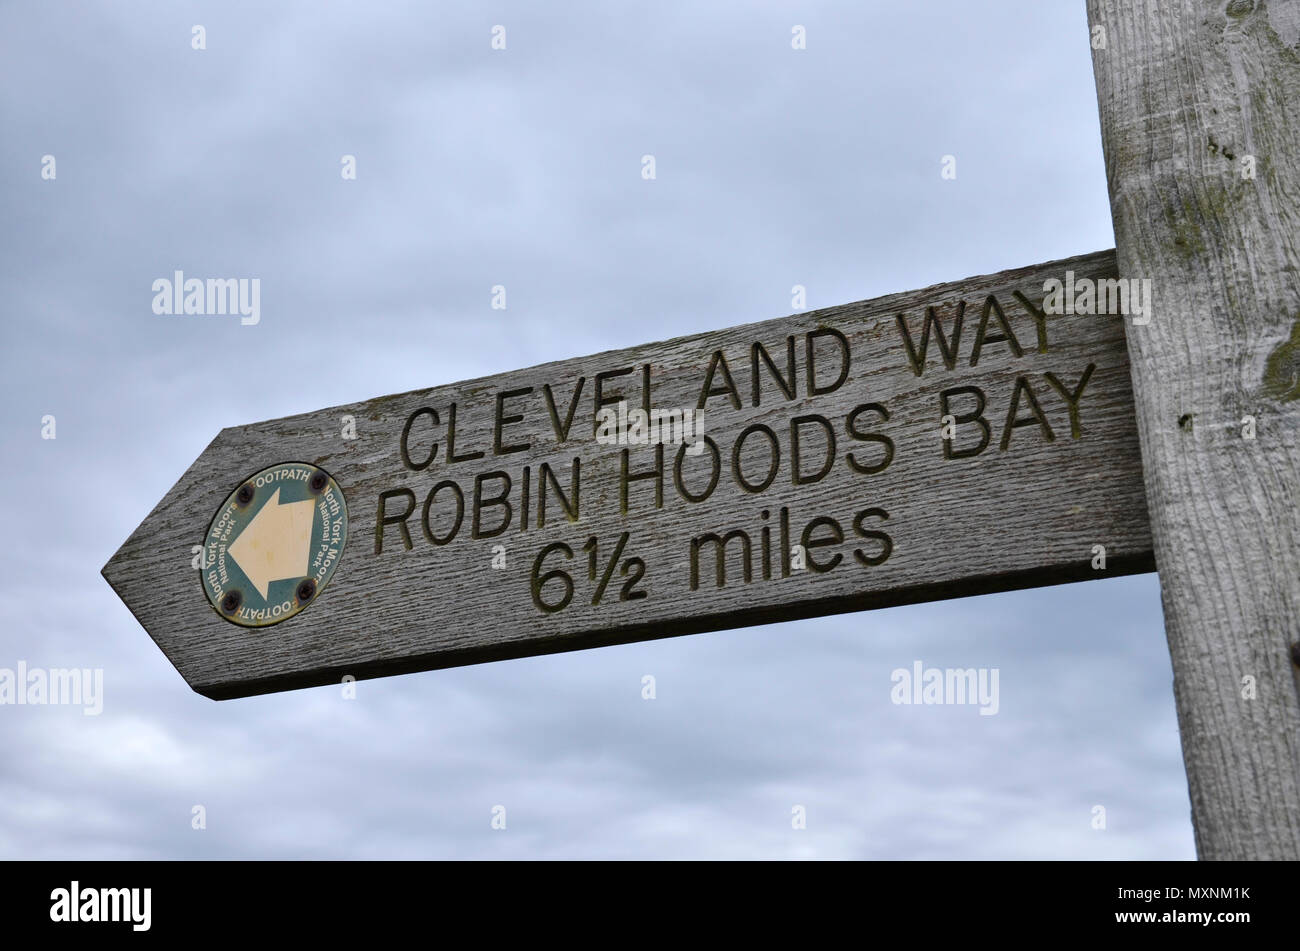 A Cleveland Way footpath sign at Whitby on the North Yorkshire moors national park Stock Photo